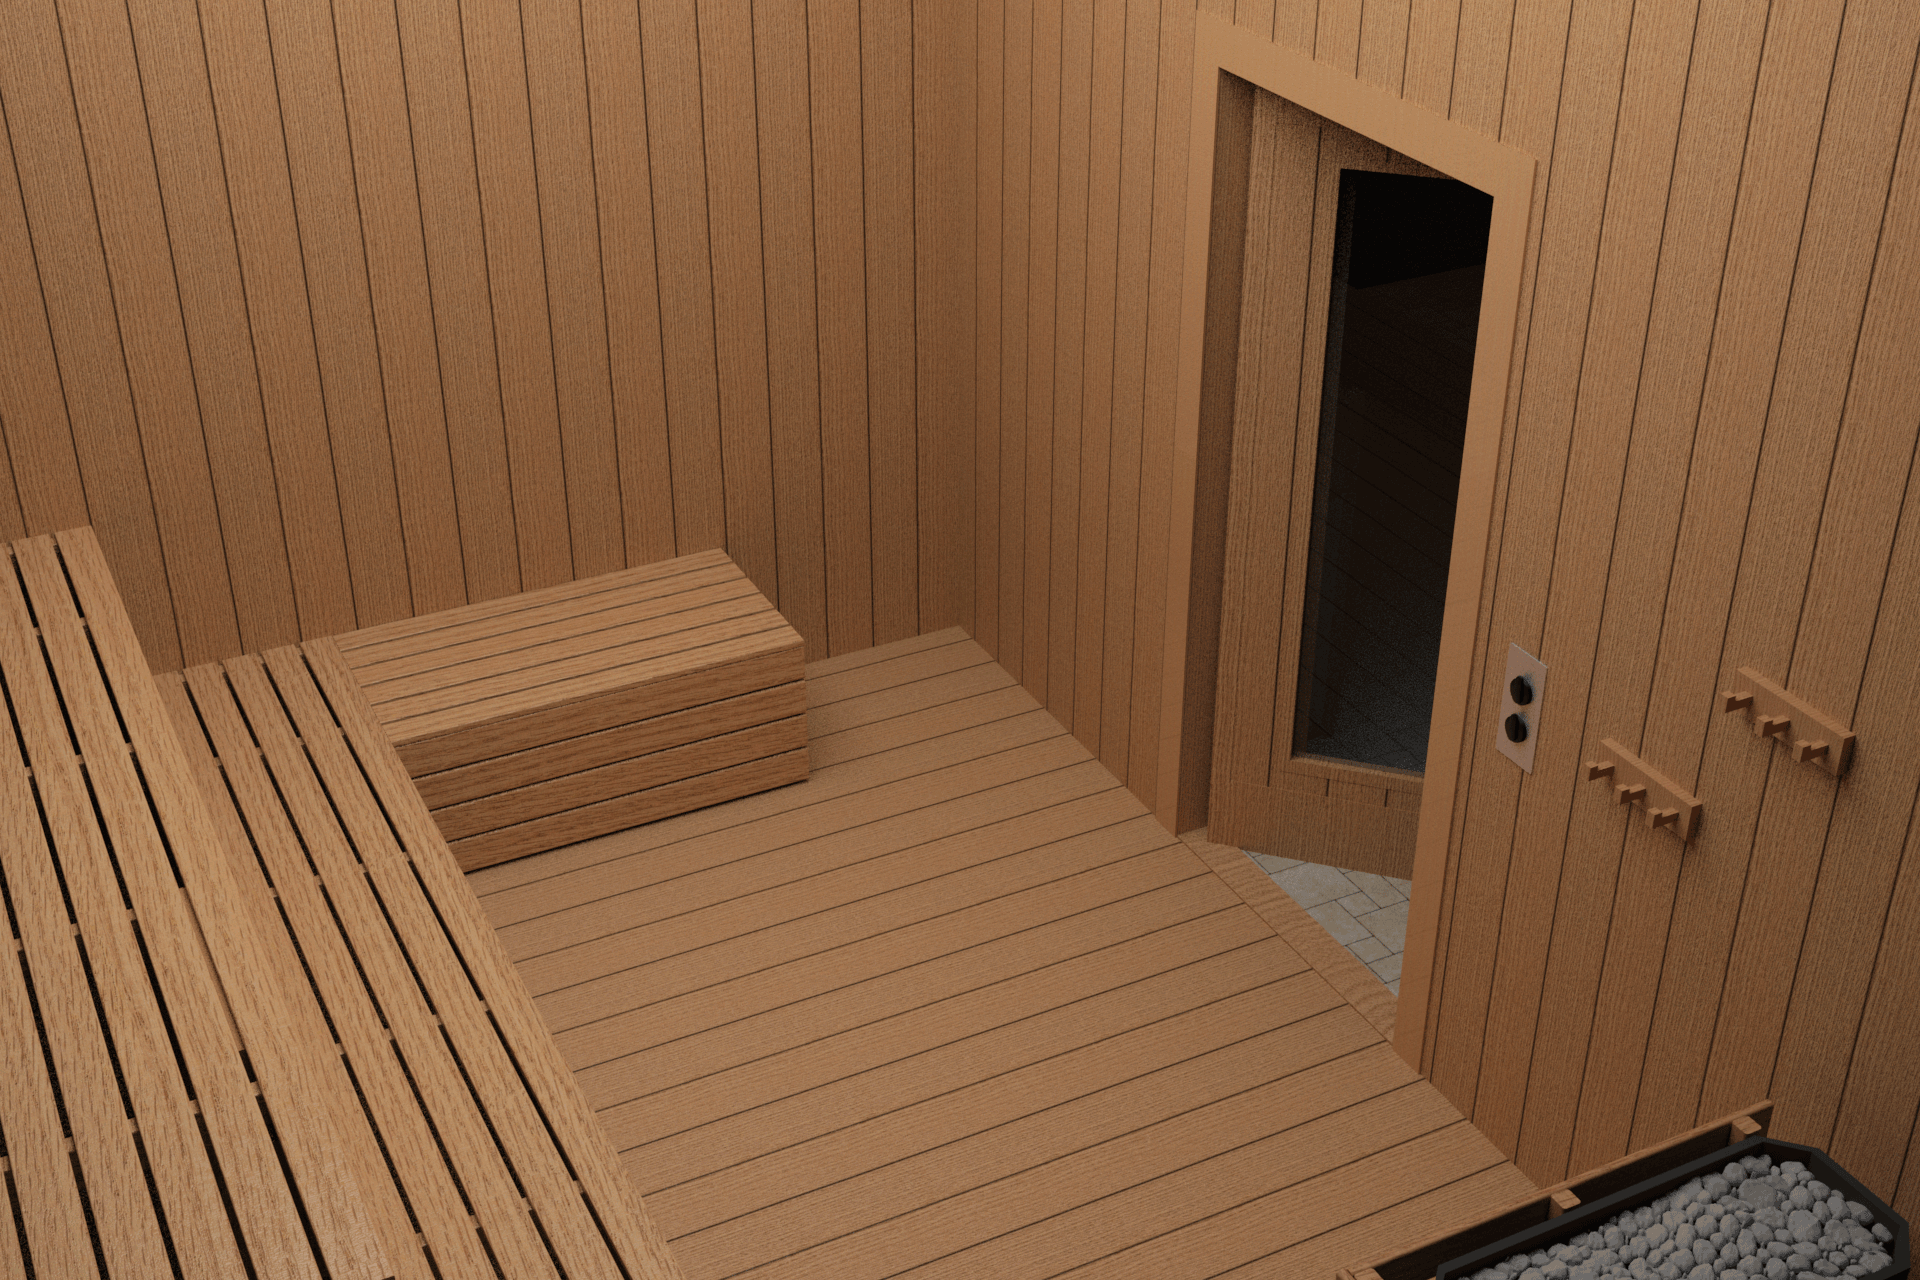 The inside of a sauna showing fixed seating, temperature controls, clothes hooks, and a door with a glazing panel.